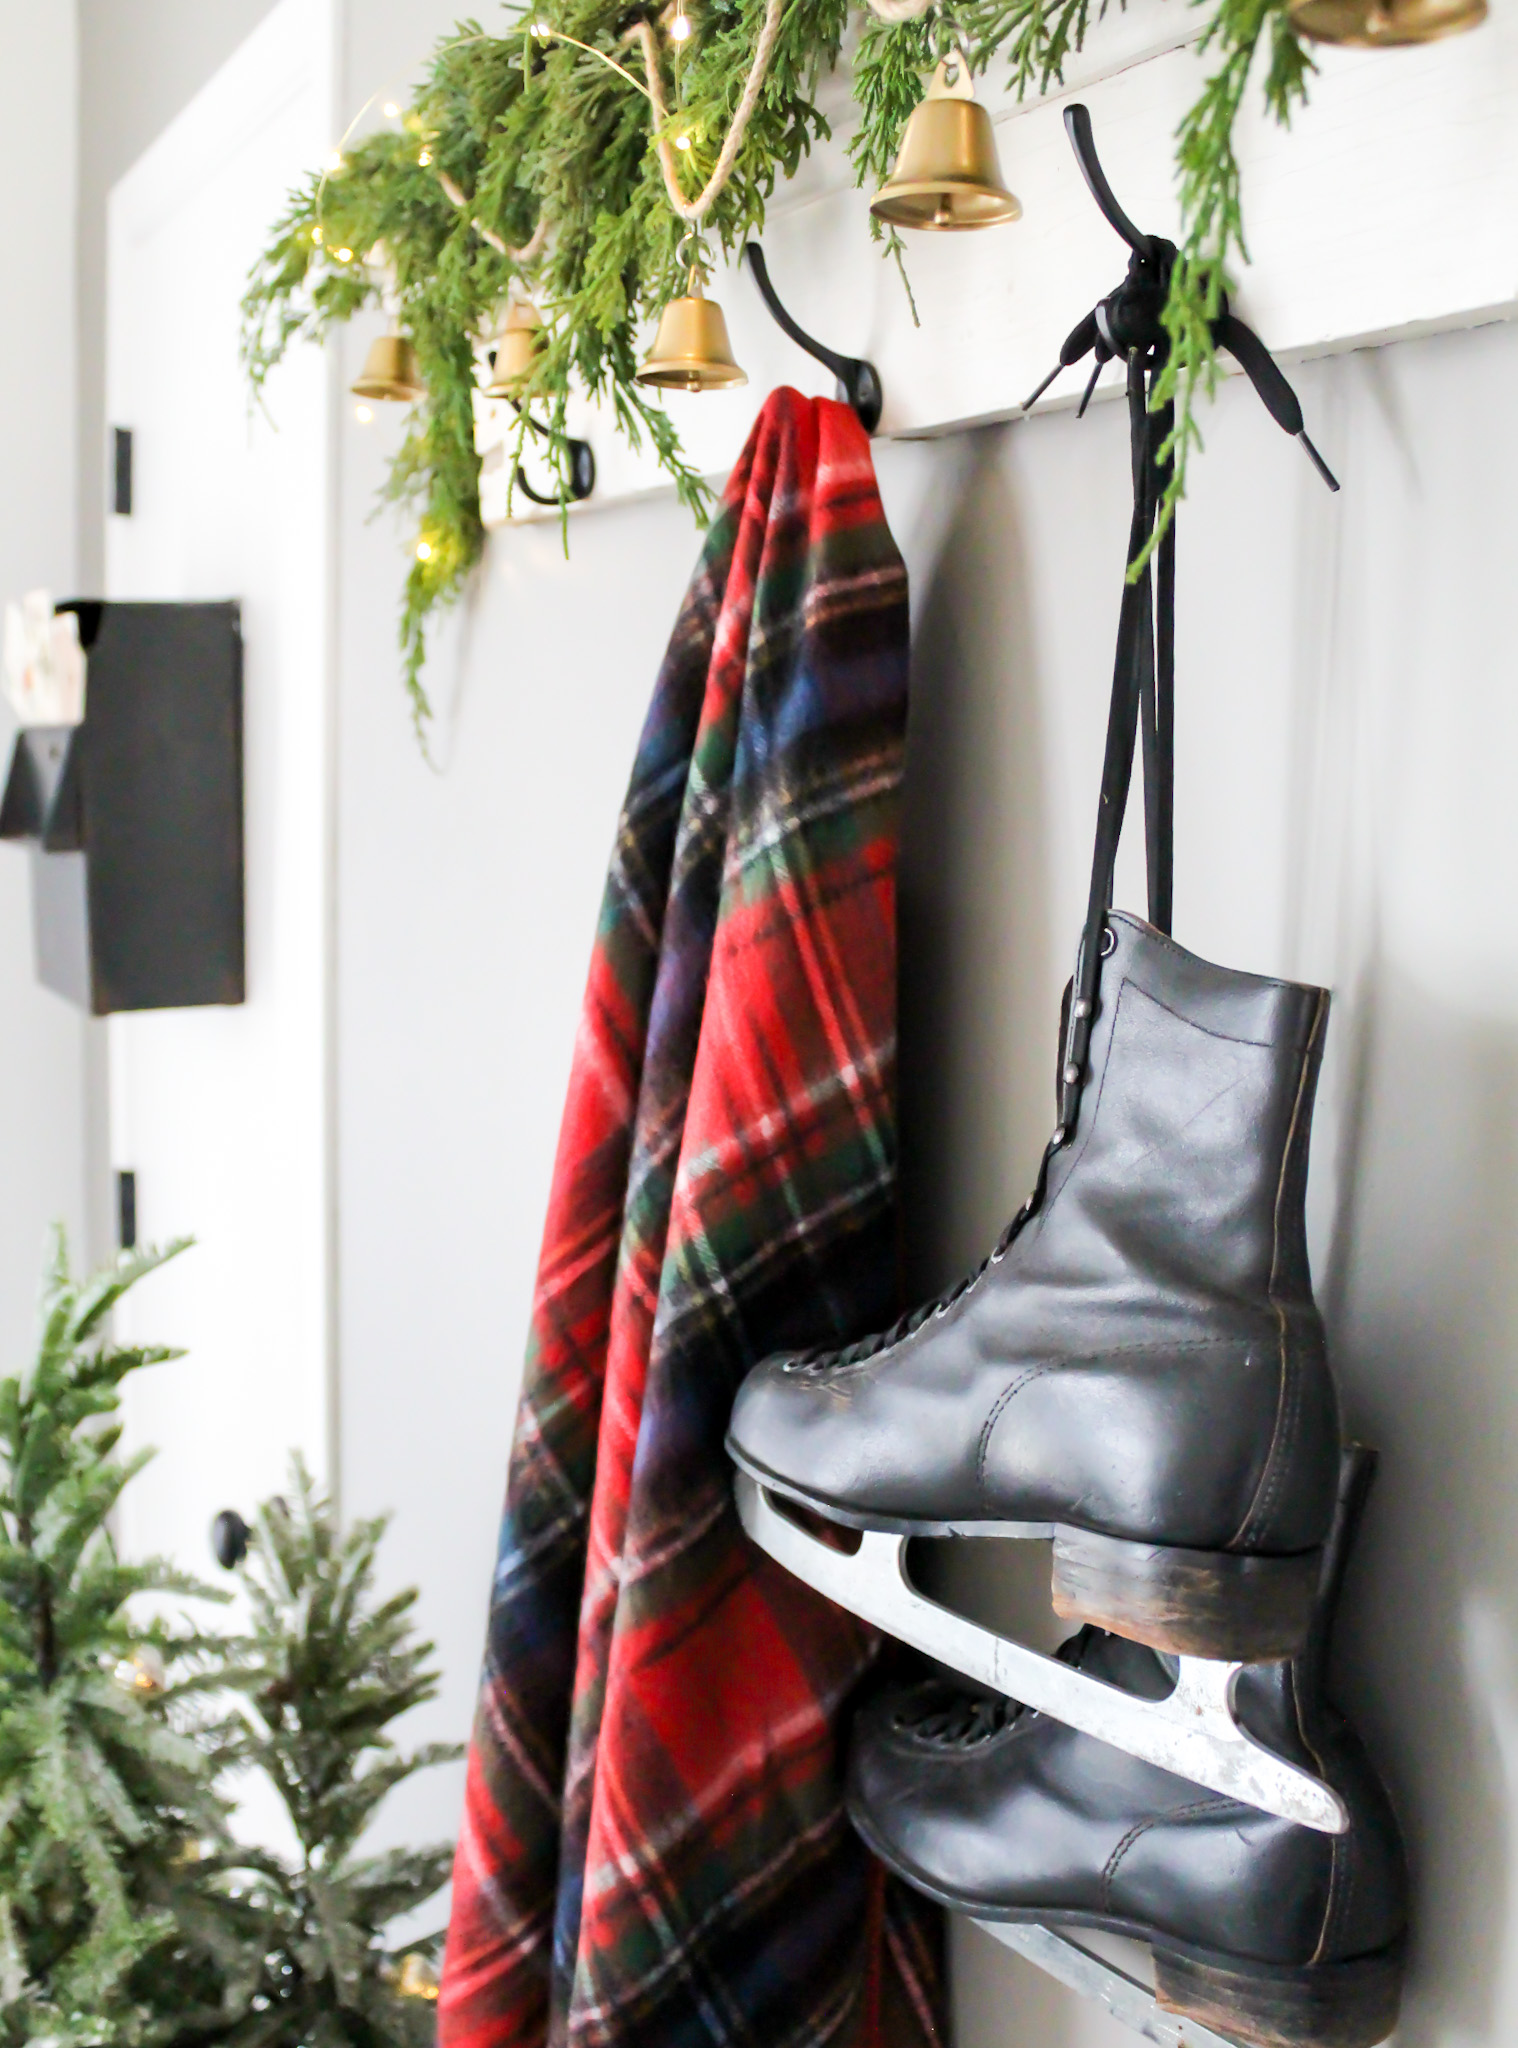 Christmas Entry with Plaid Blanket and Vintage Ice Skates - 5 Simple Ways To Get Ready For Christmas Now - Midwest Life and Style Blog